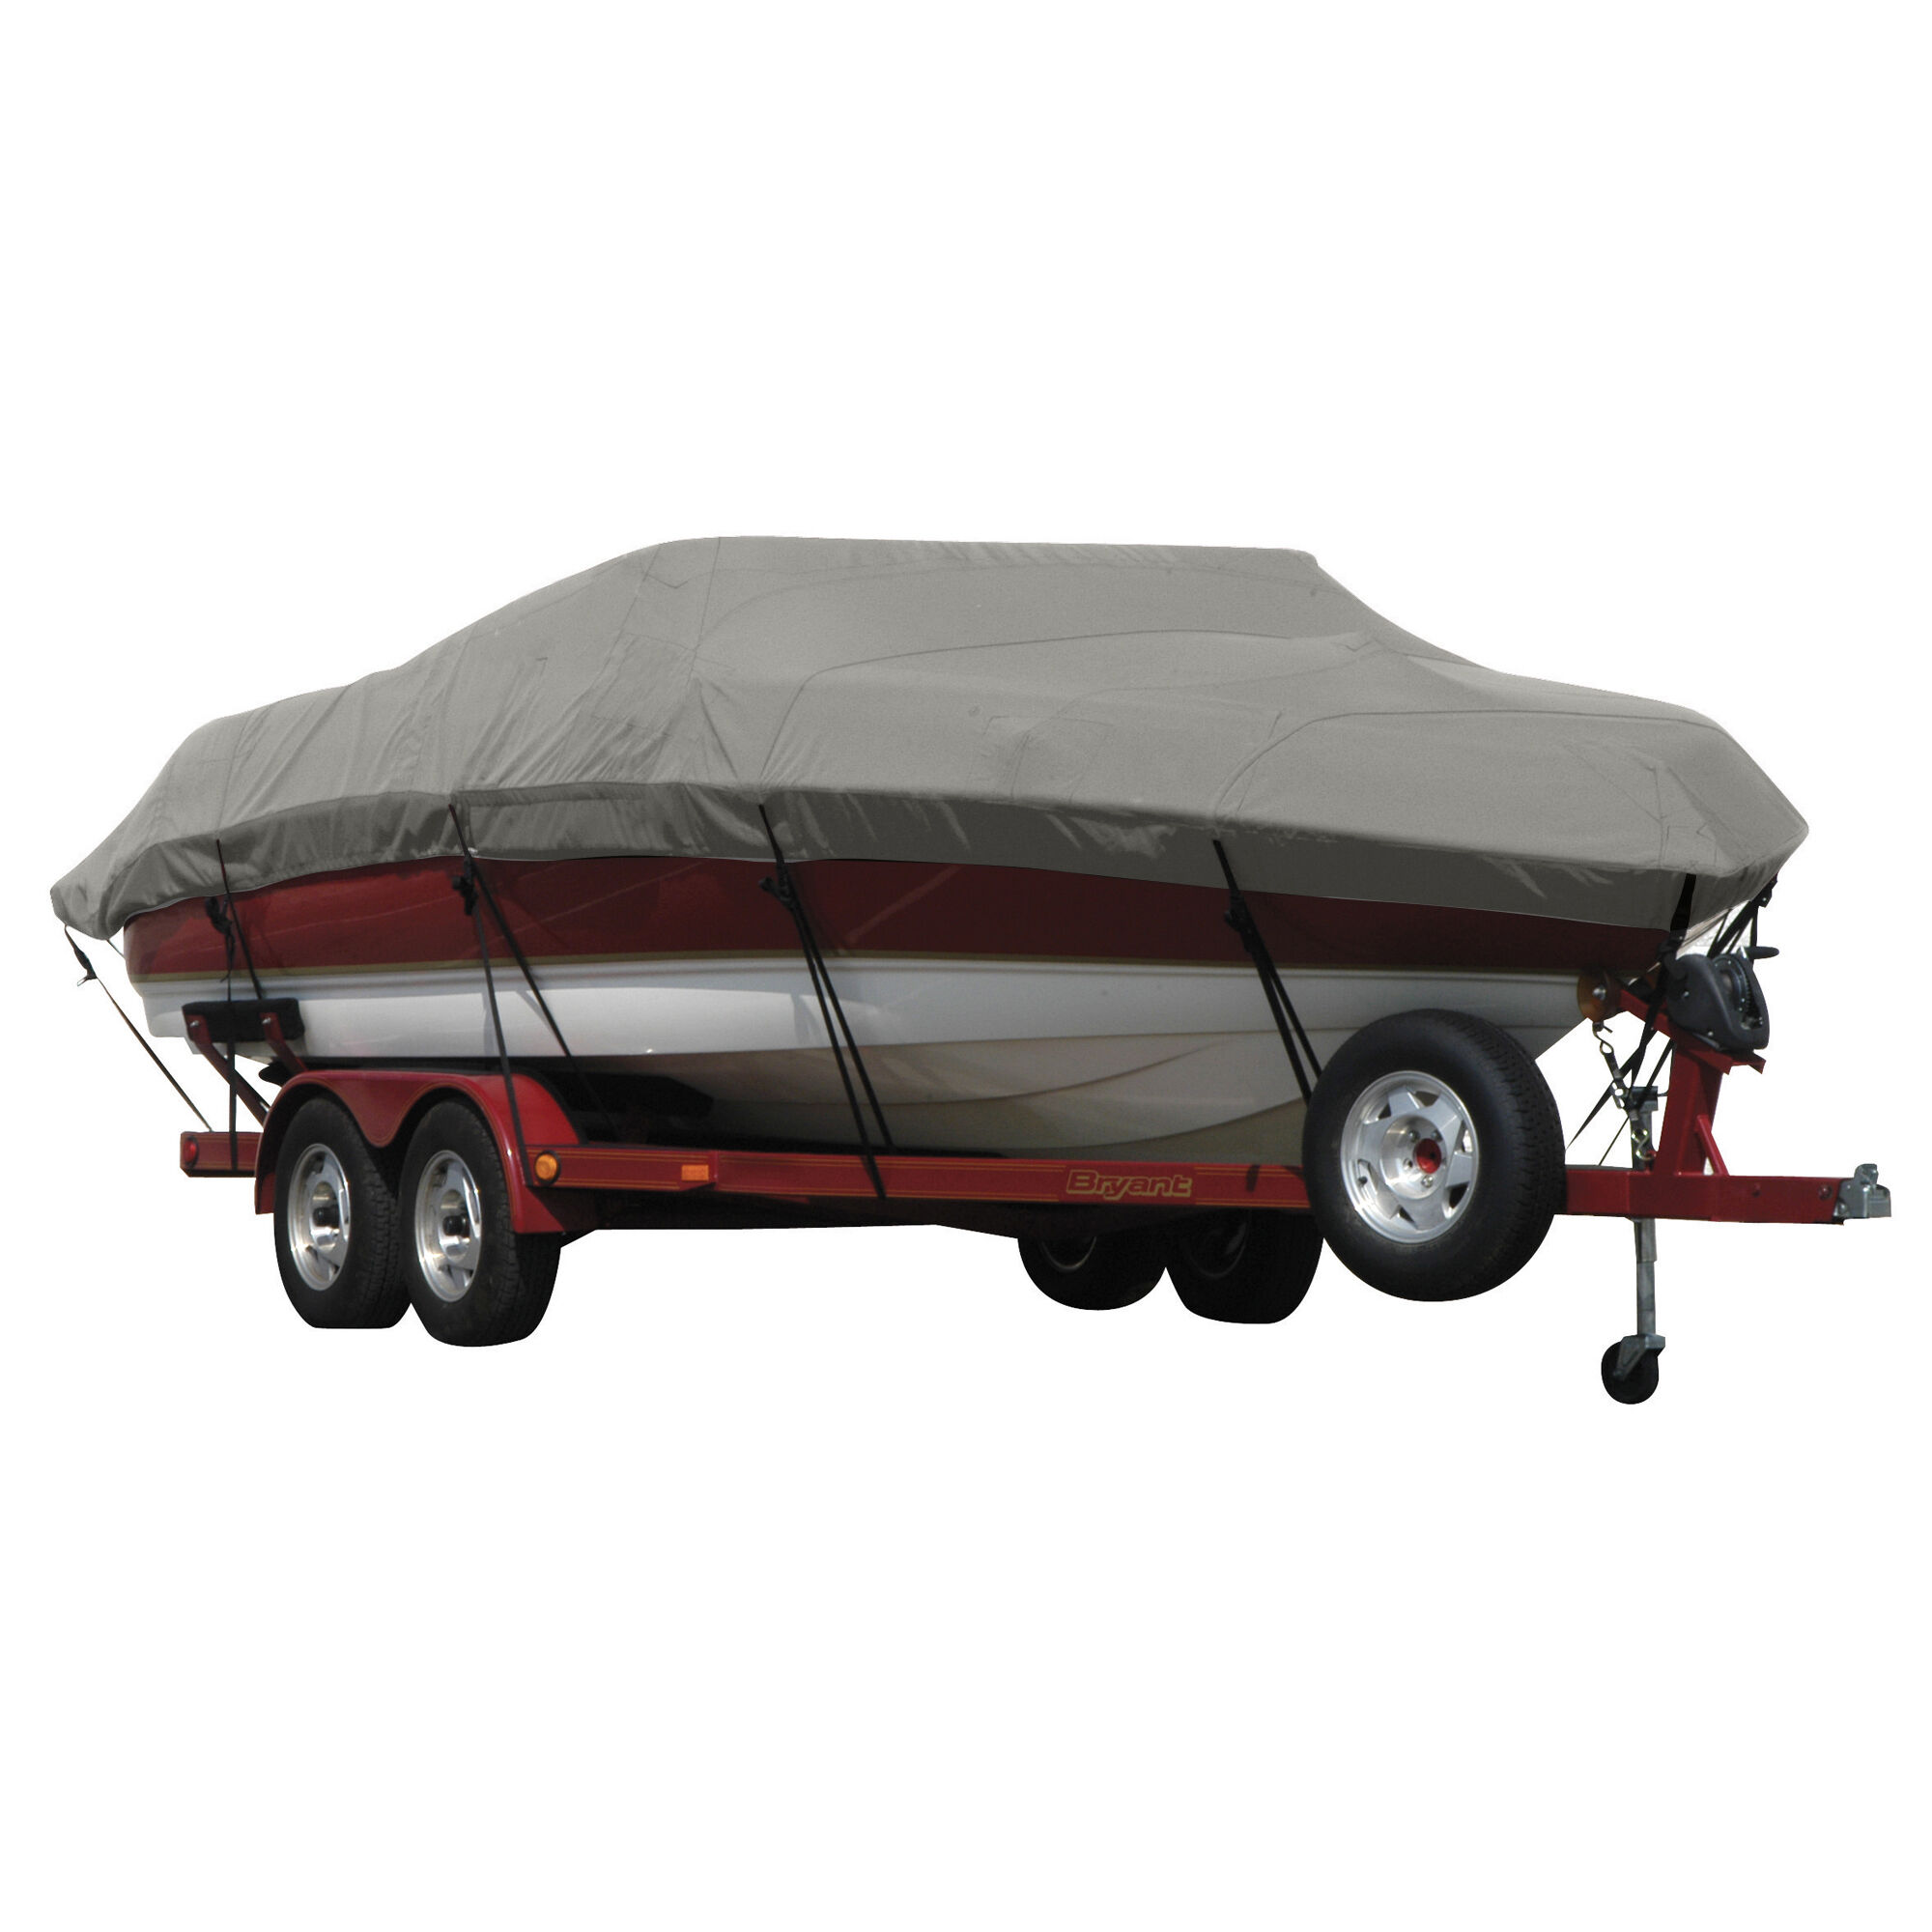 Covermate Exact Fit Sunbrella Boat Cover For Tracker Pro Guide V-175 Wt Bow Rider w/ Minnkota Port Trolling Motor I/O in Charcoal Grey Heather